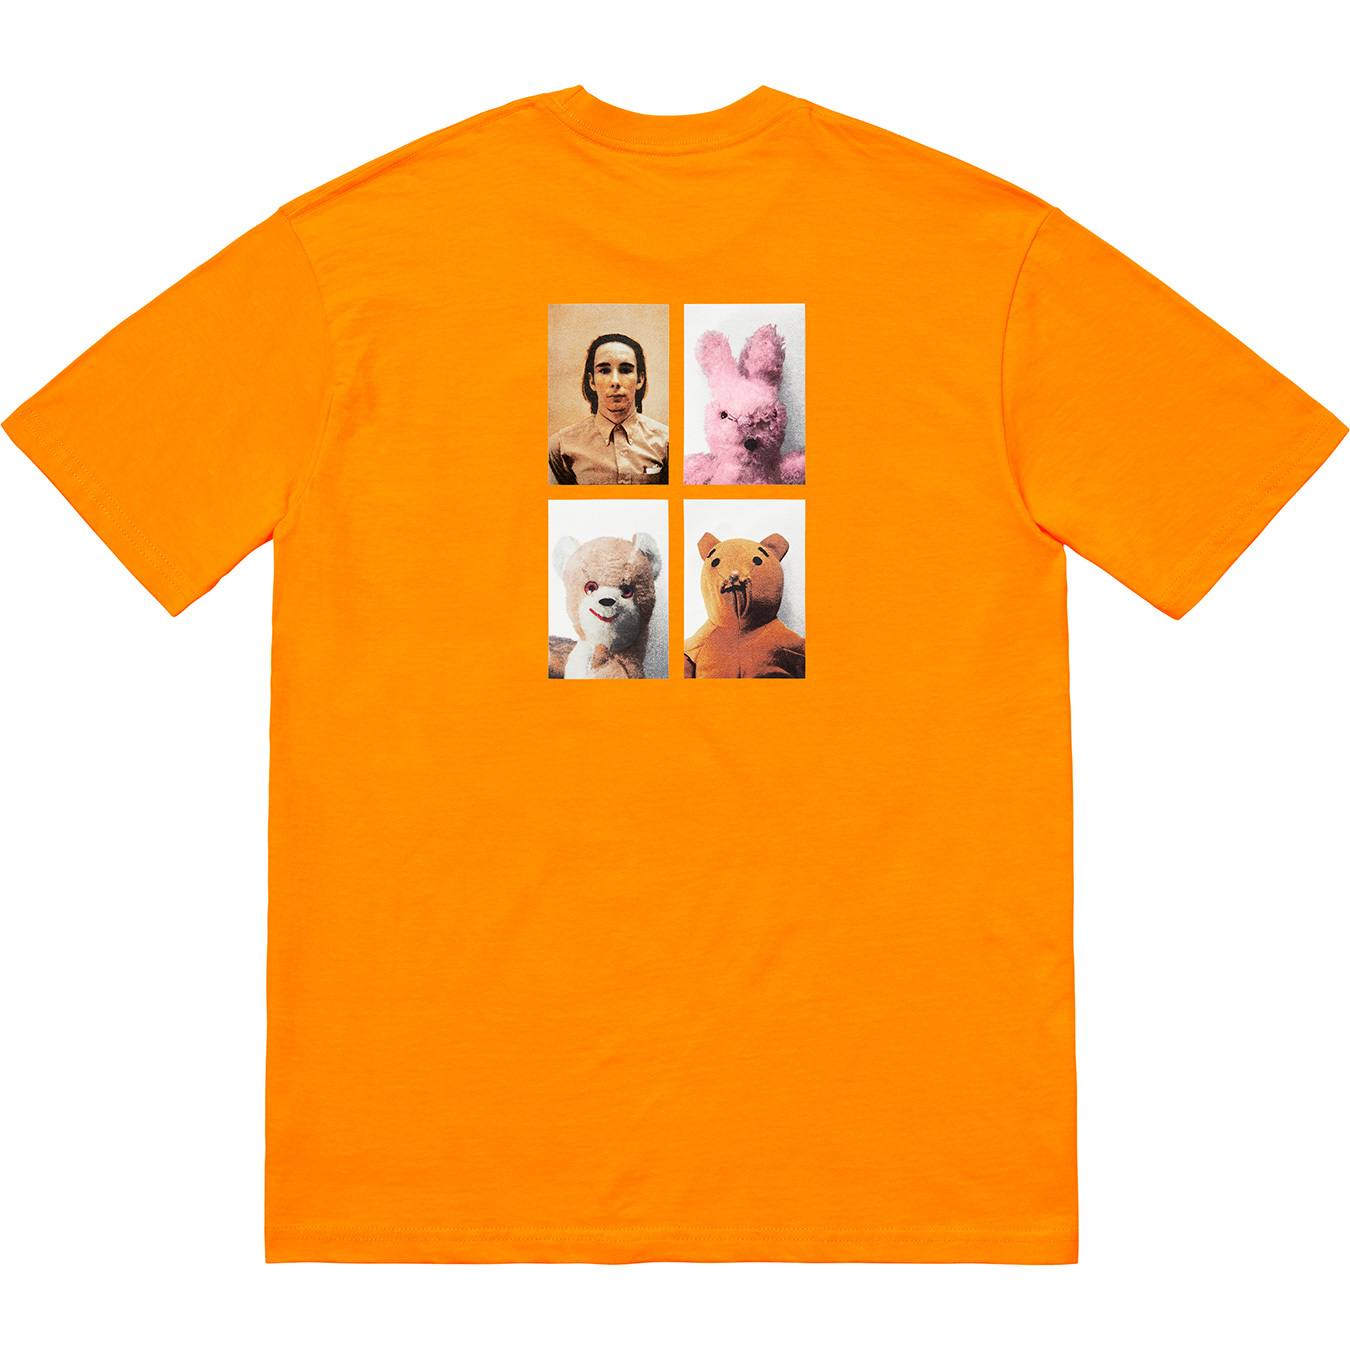 Mike Kelley Ahh…Youth! Tee - fall winter 2018 - Supreme